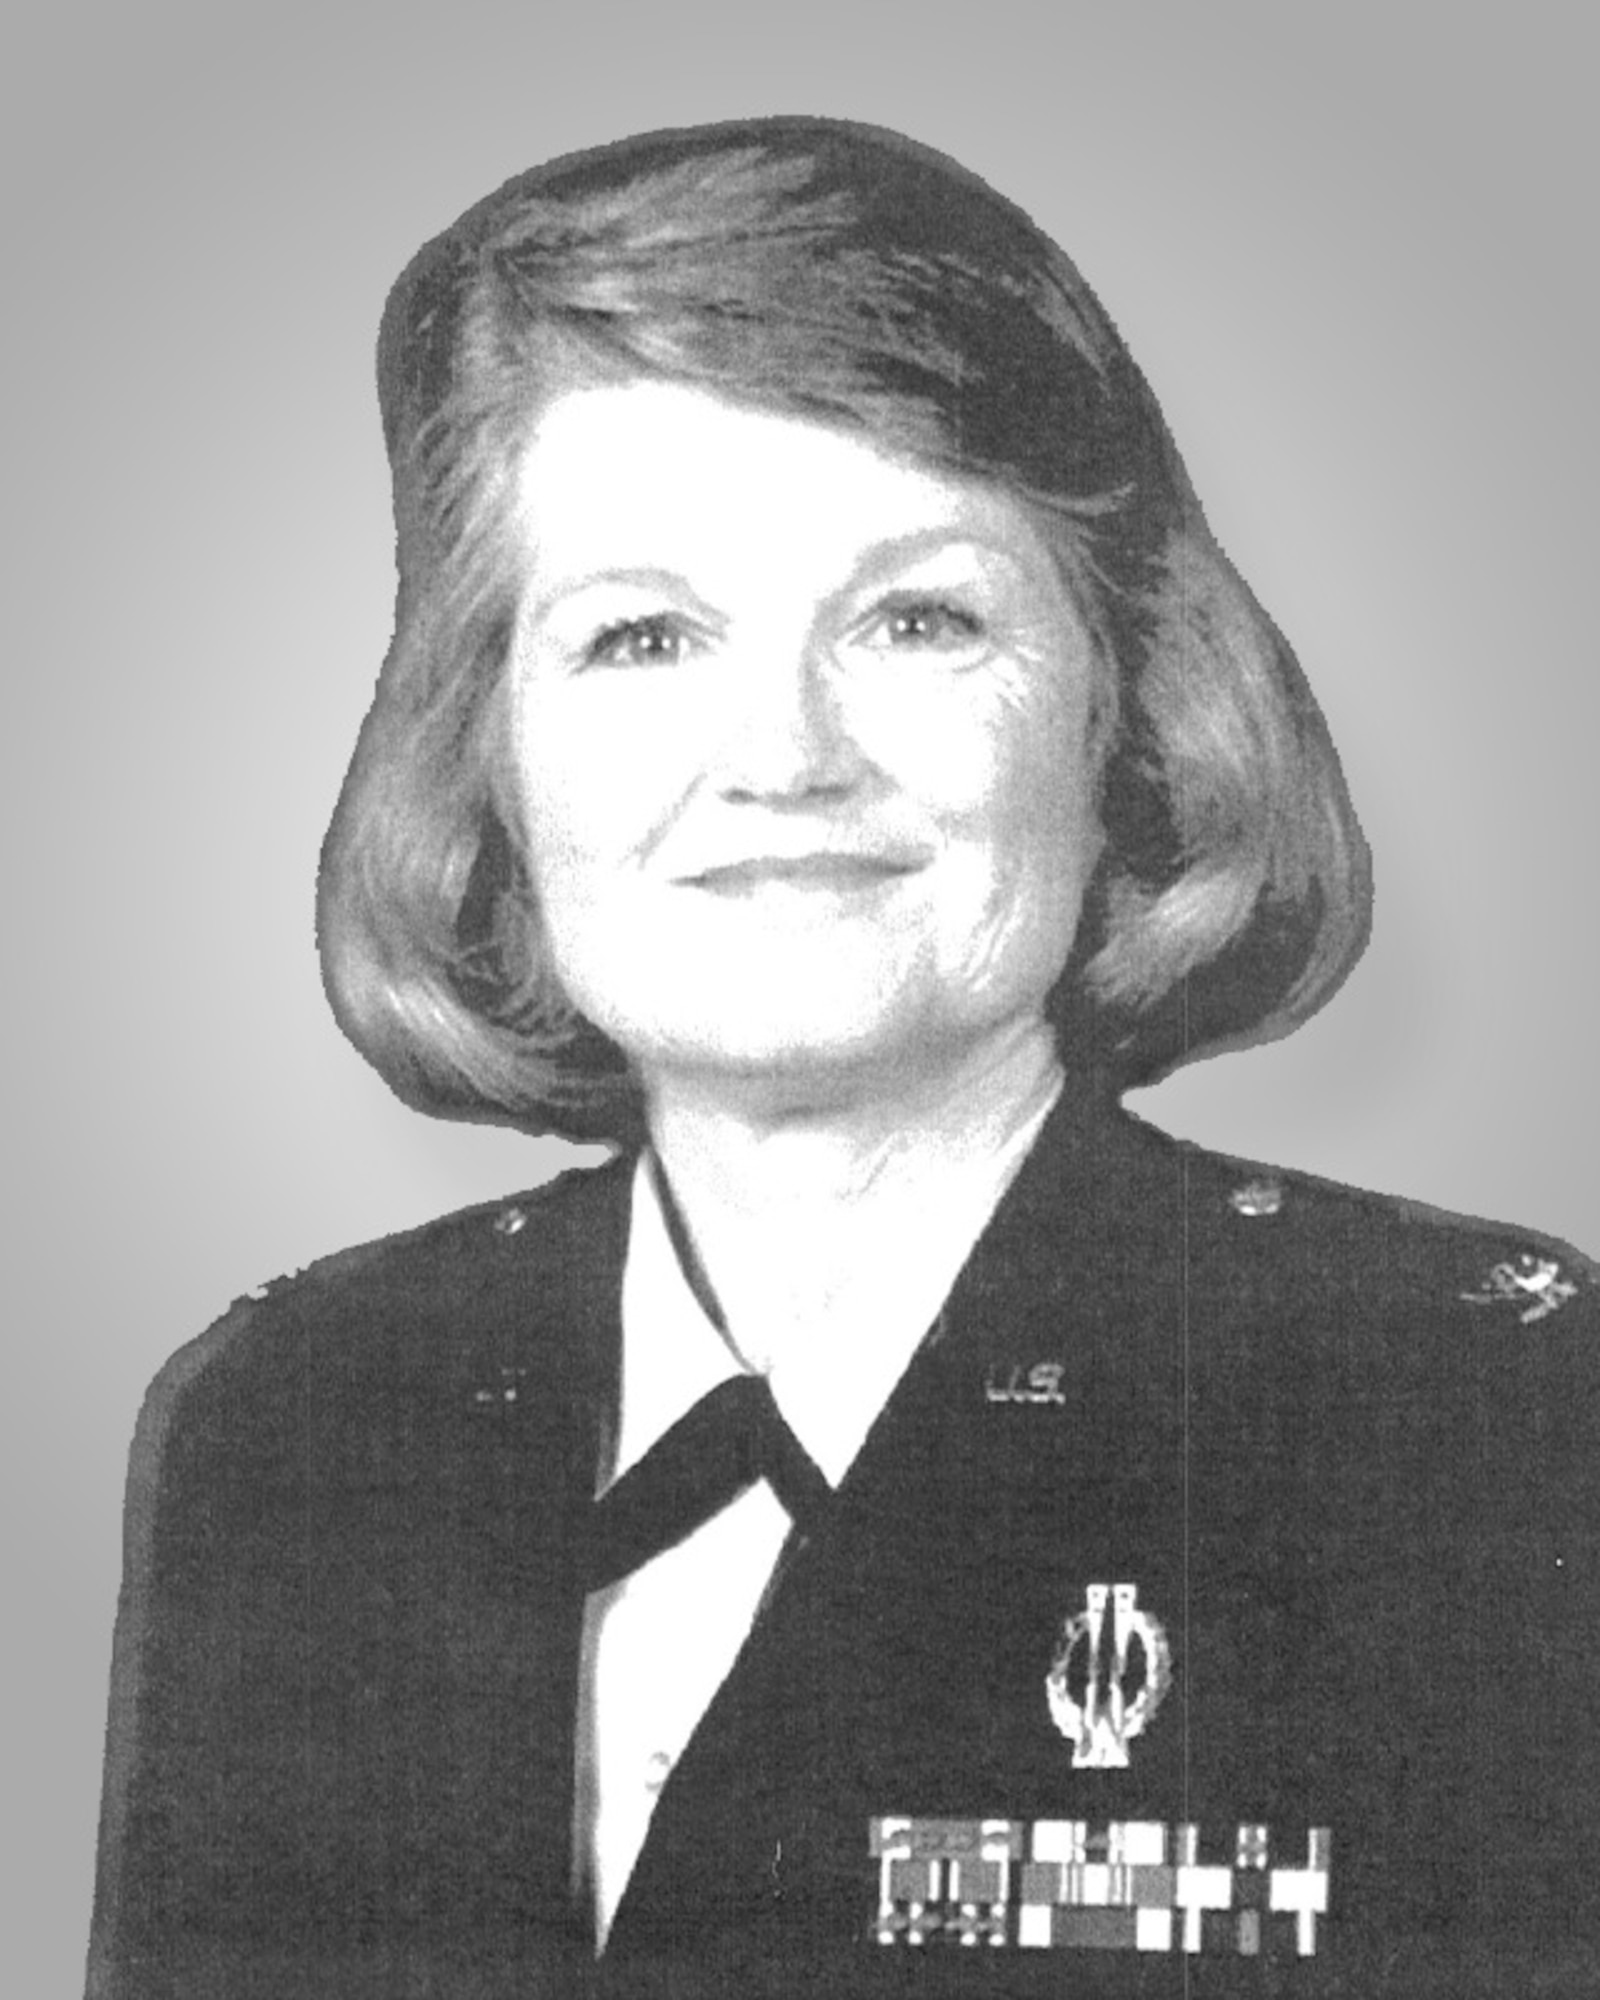 Col. Margie Humphrey, former Air Reserve Personnel Center commander, was Headquarters ARPC’s first female commander located at the former Lowry Air Force Base, Colorado. She served as the 24th ARPC commander from Nov. 5, 1997 – June 15, 2000. (U.S. Air Force photo)